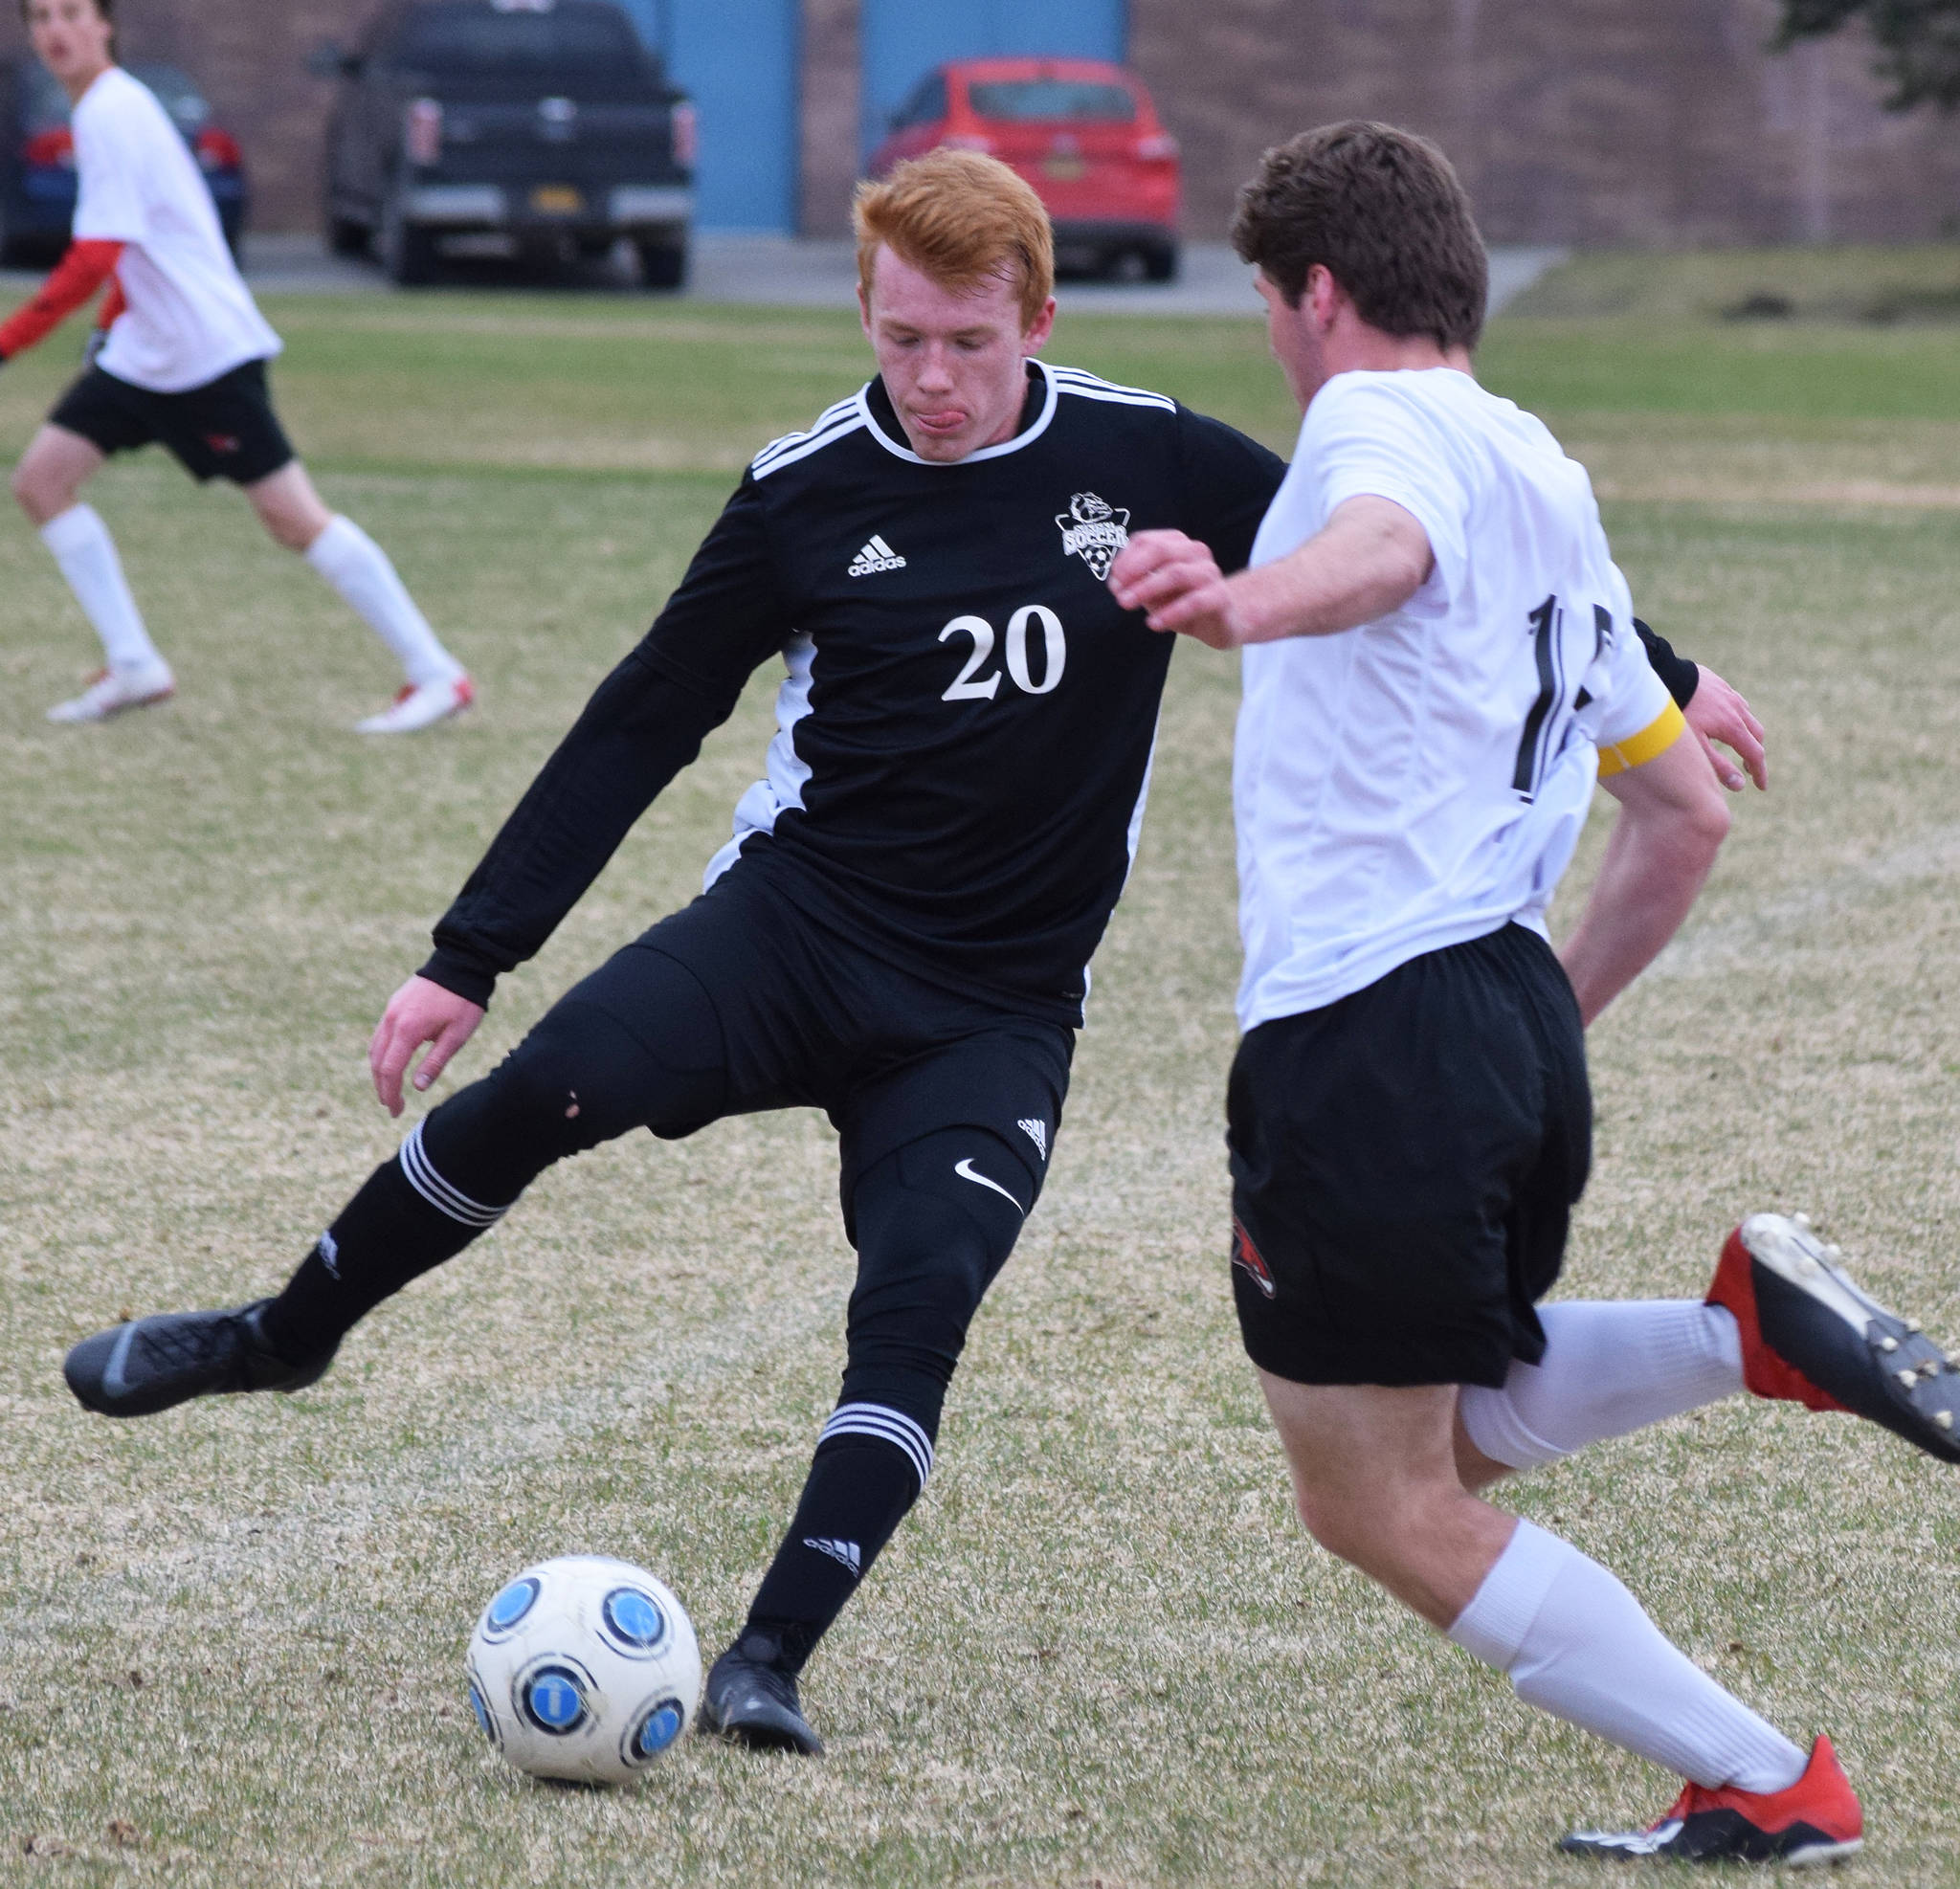 Nikiski’s Jace Kornstad (20) makes a play on the ball in front of Houston’s Owen Mulhaney Friday, May 10, 2019, in a nonconference game in Nikiski, Alaska. (Photo by Joey Klecka/Peninsula Clarion)